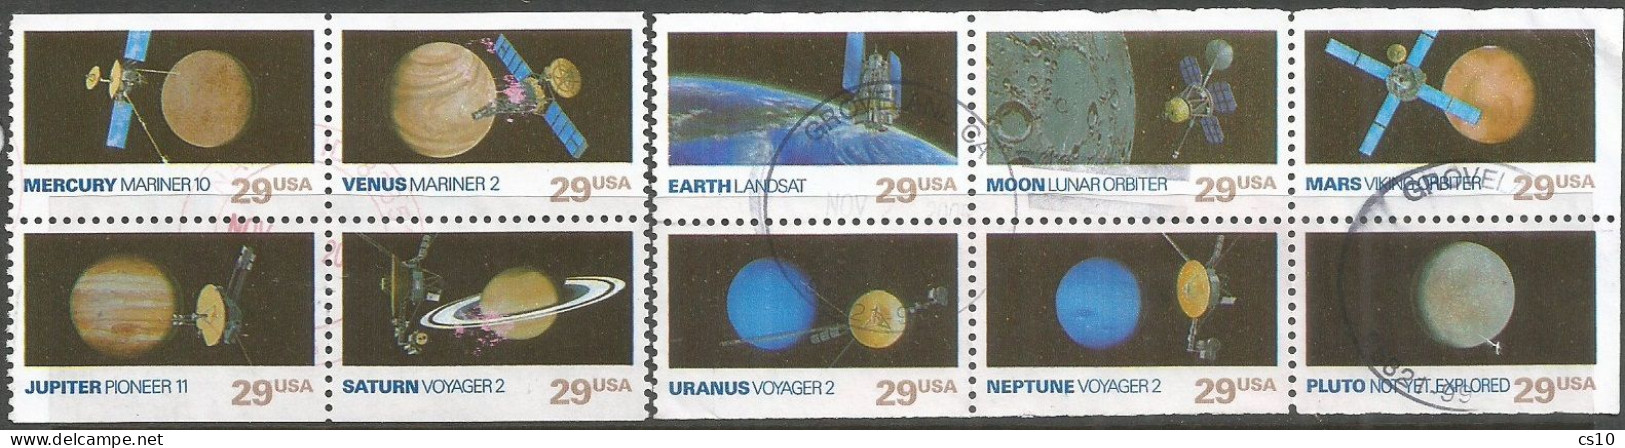 USA 1991 Space Exploration Cpl10v Set In #2 Blocks From Booklet Of 4+6pcs In VFU Condition REALLY USED - USA